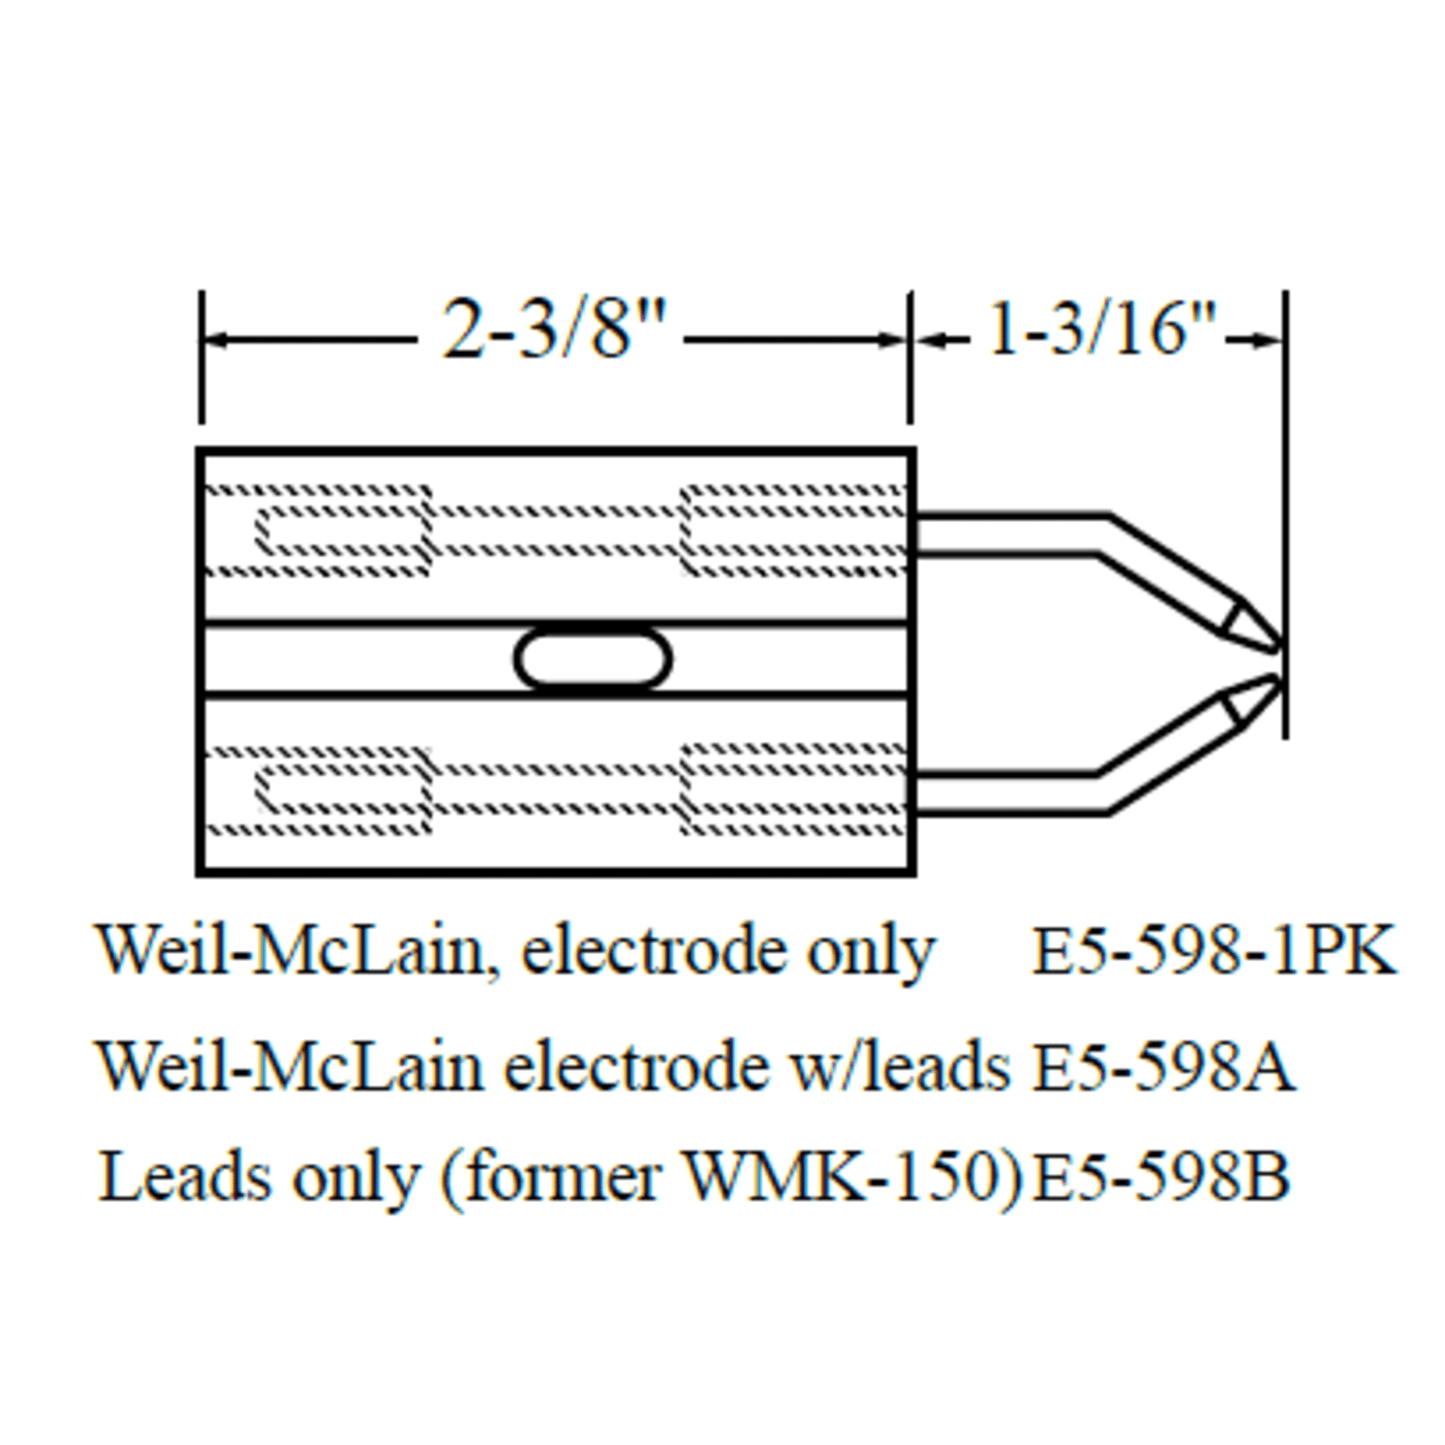 Westwood 598B Leads only - Weil-Mclain Electrode E5-598